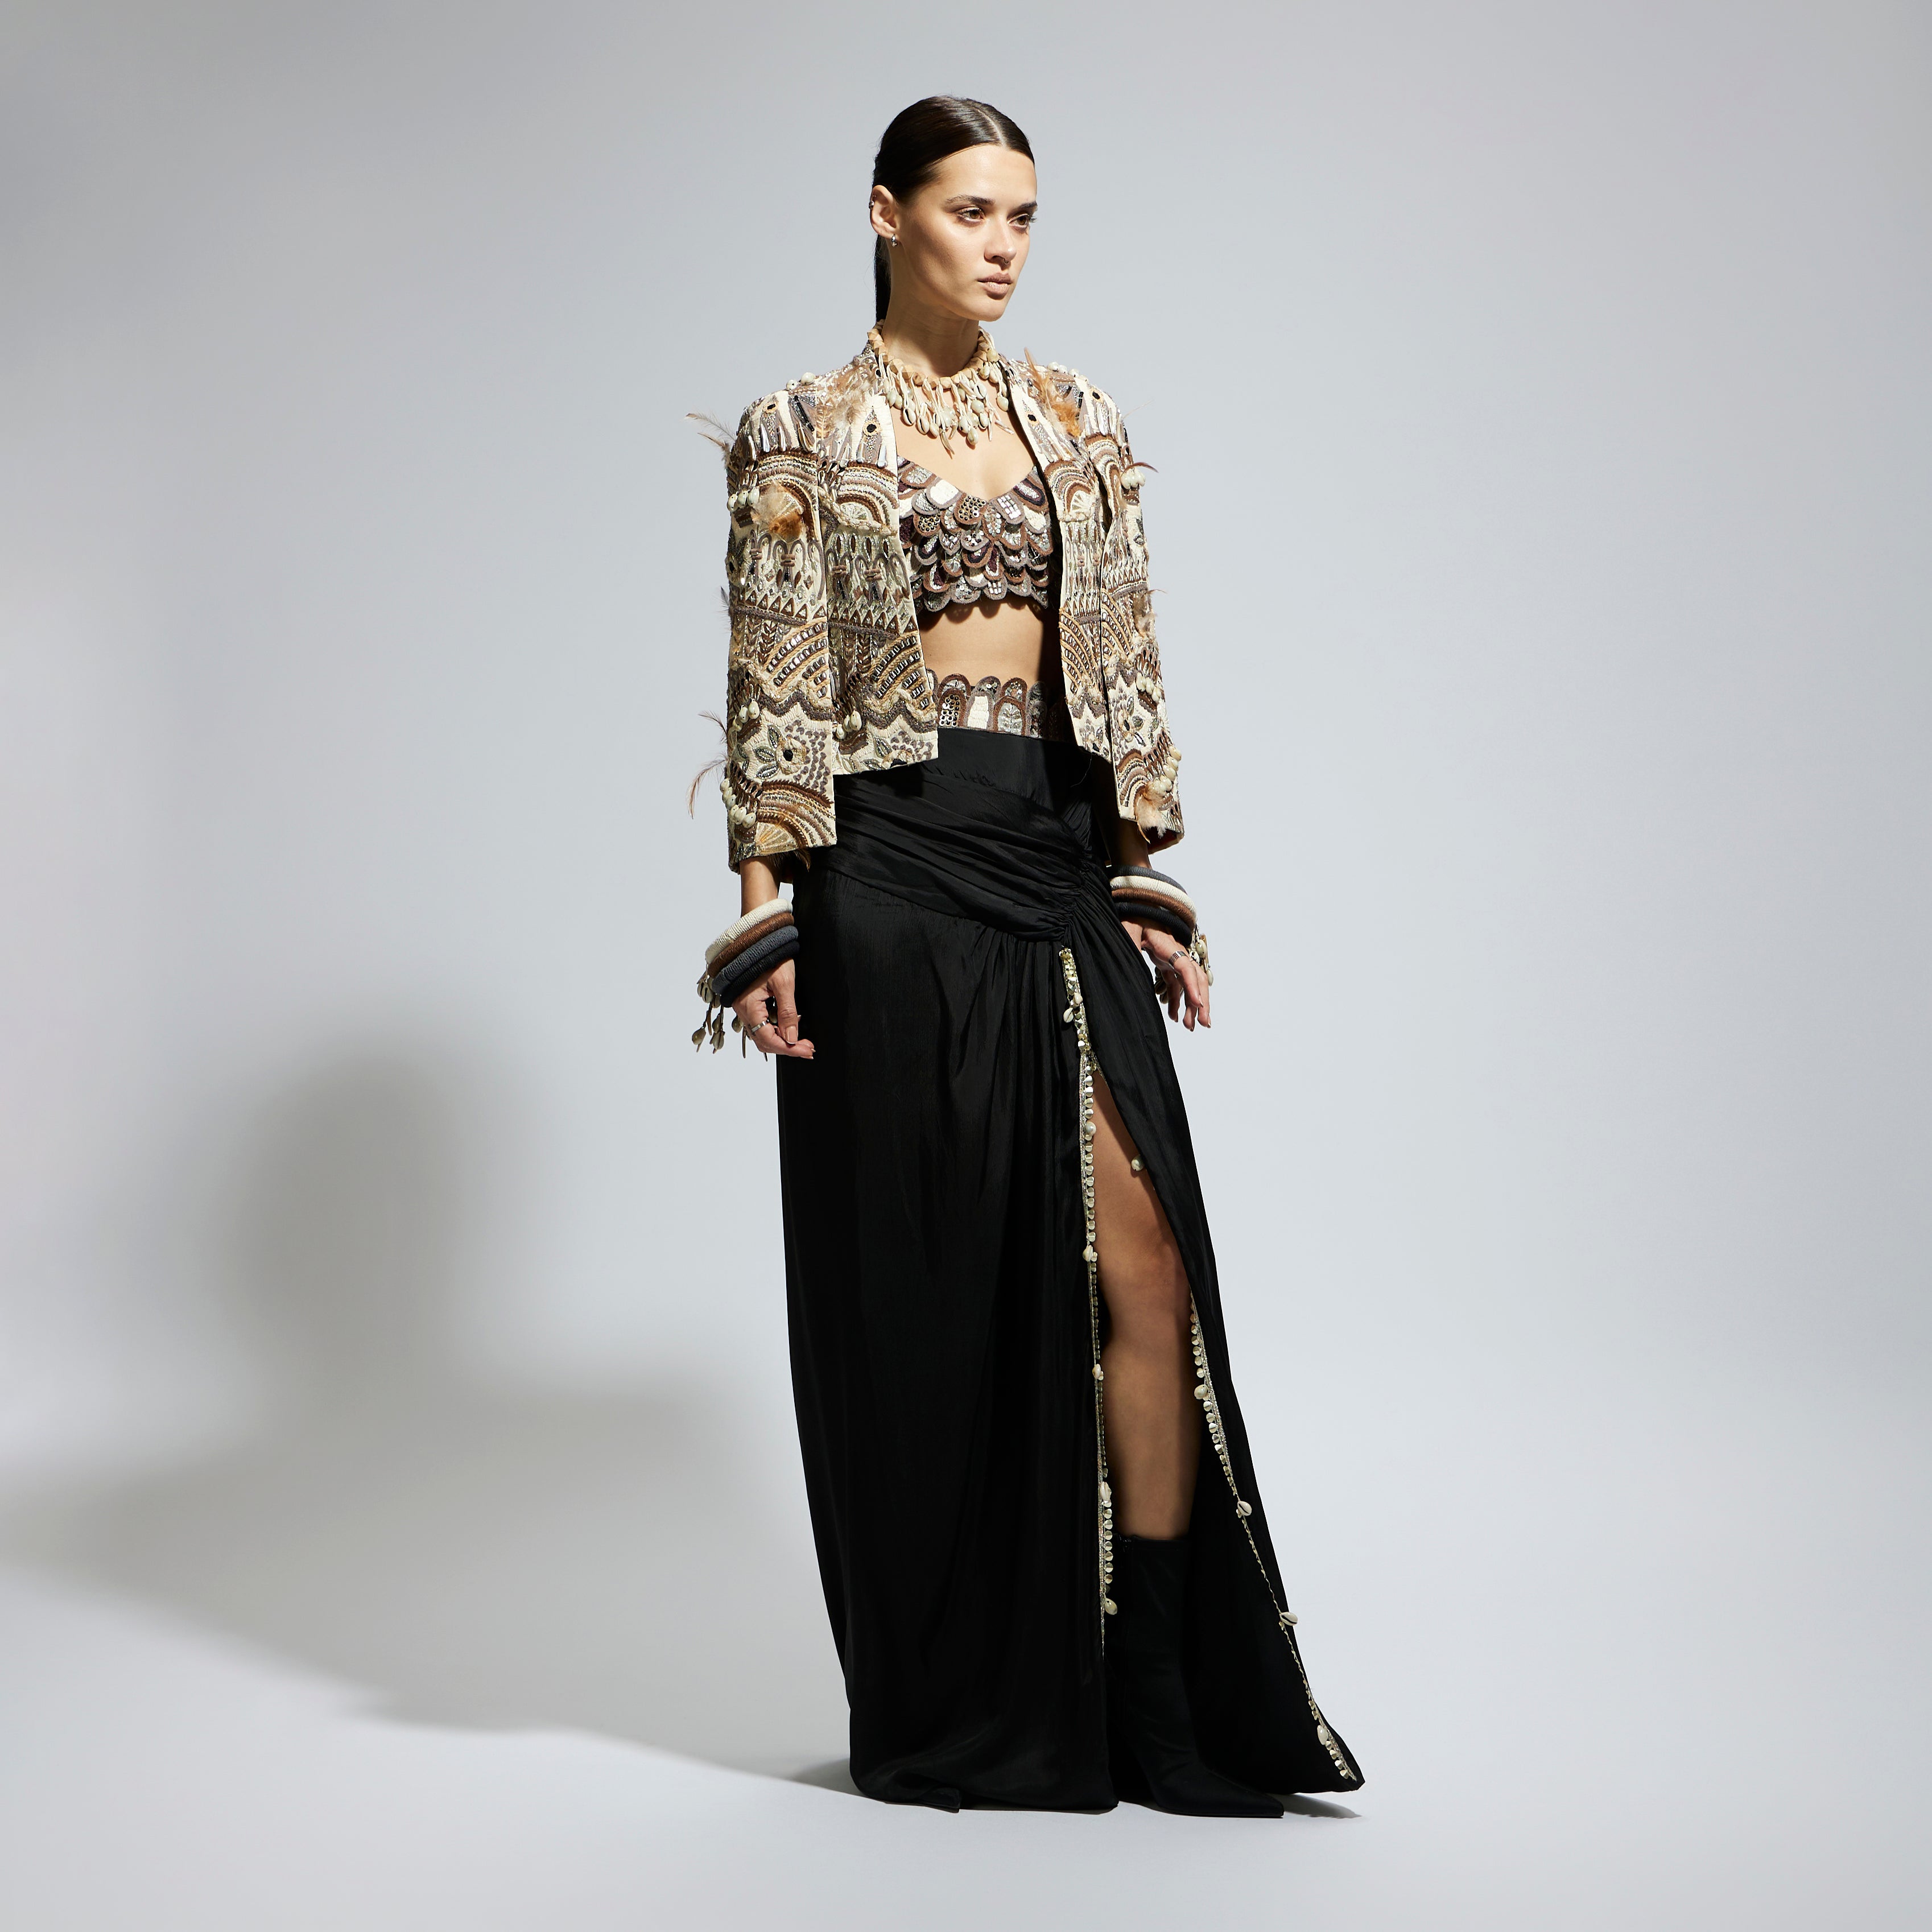 SAMSARA: IVORY ABSTRACT FEATHER CAPE JACKET PAIRED WITH 3D SCALLOP BUSTIER AND BLACK HIGH SLIT SKIRT